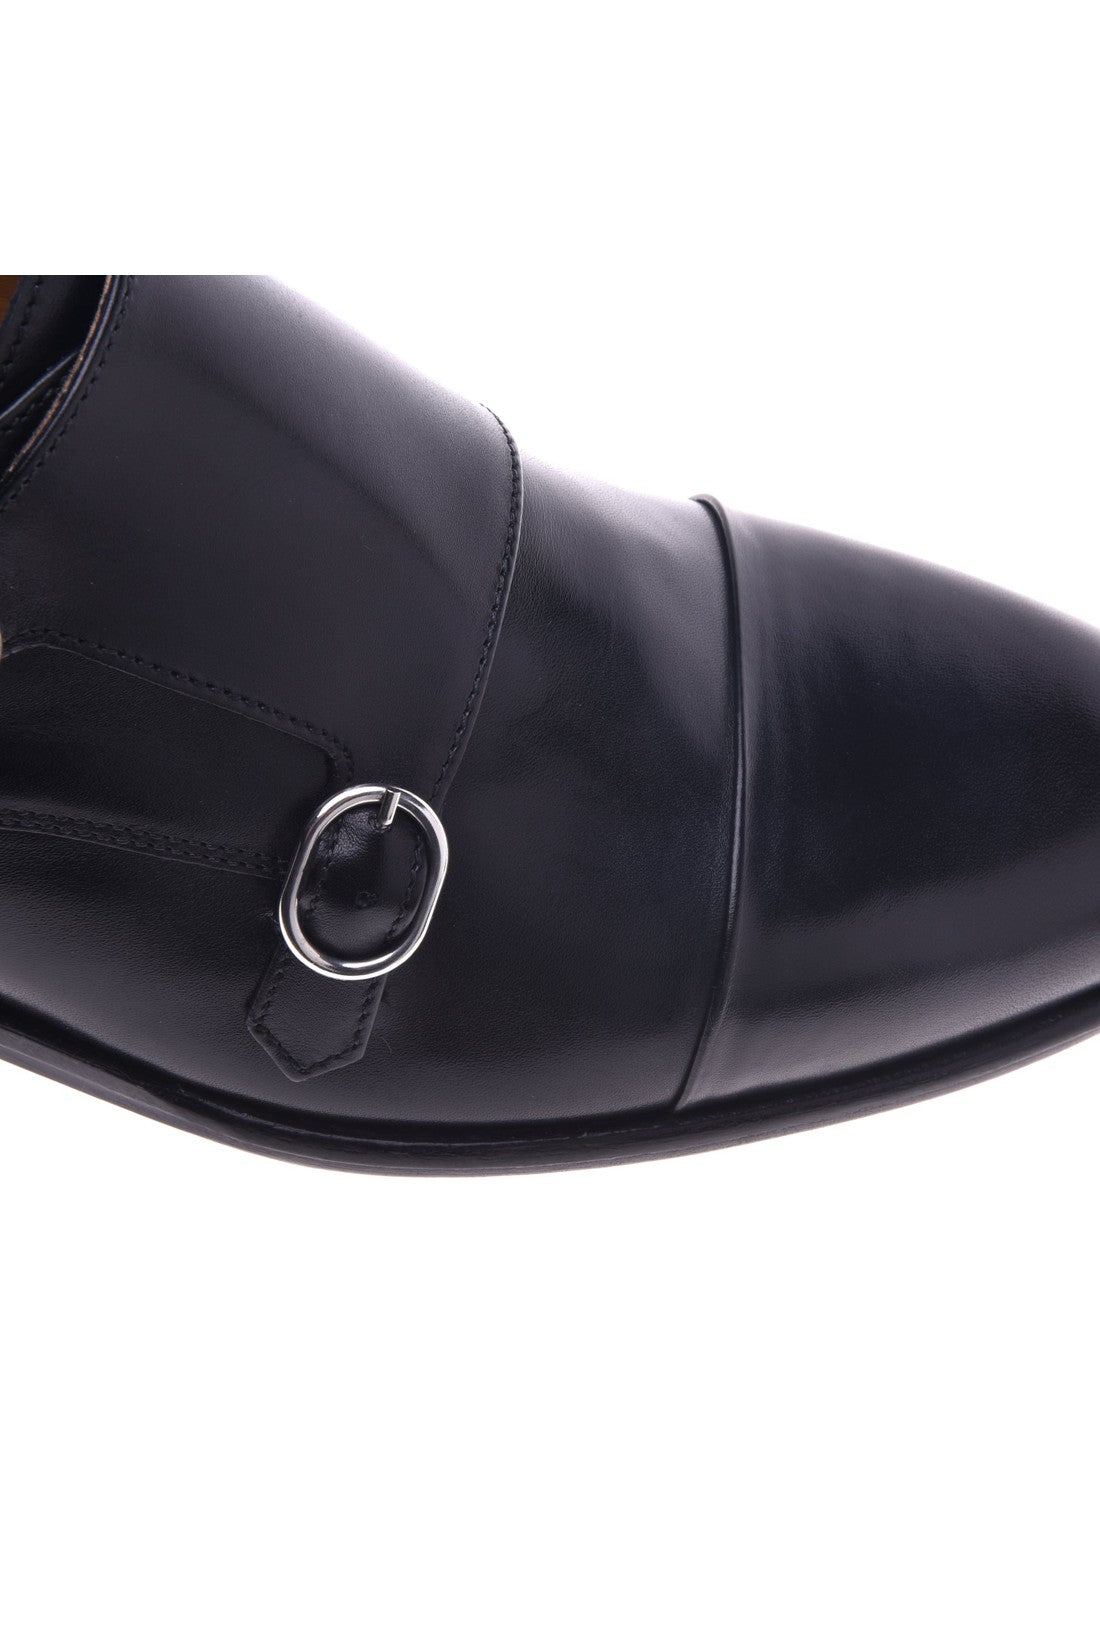 Black calfskin lace-up with double buckle